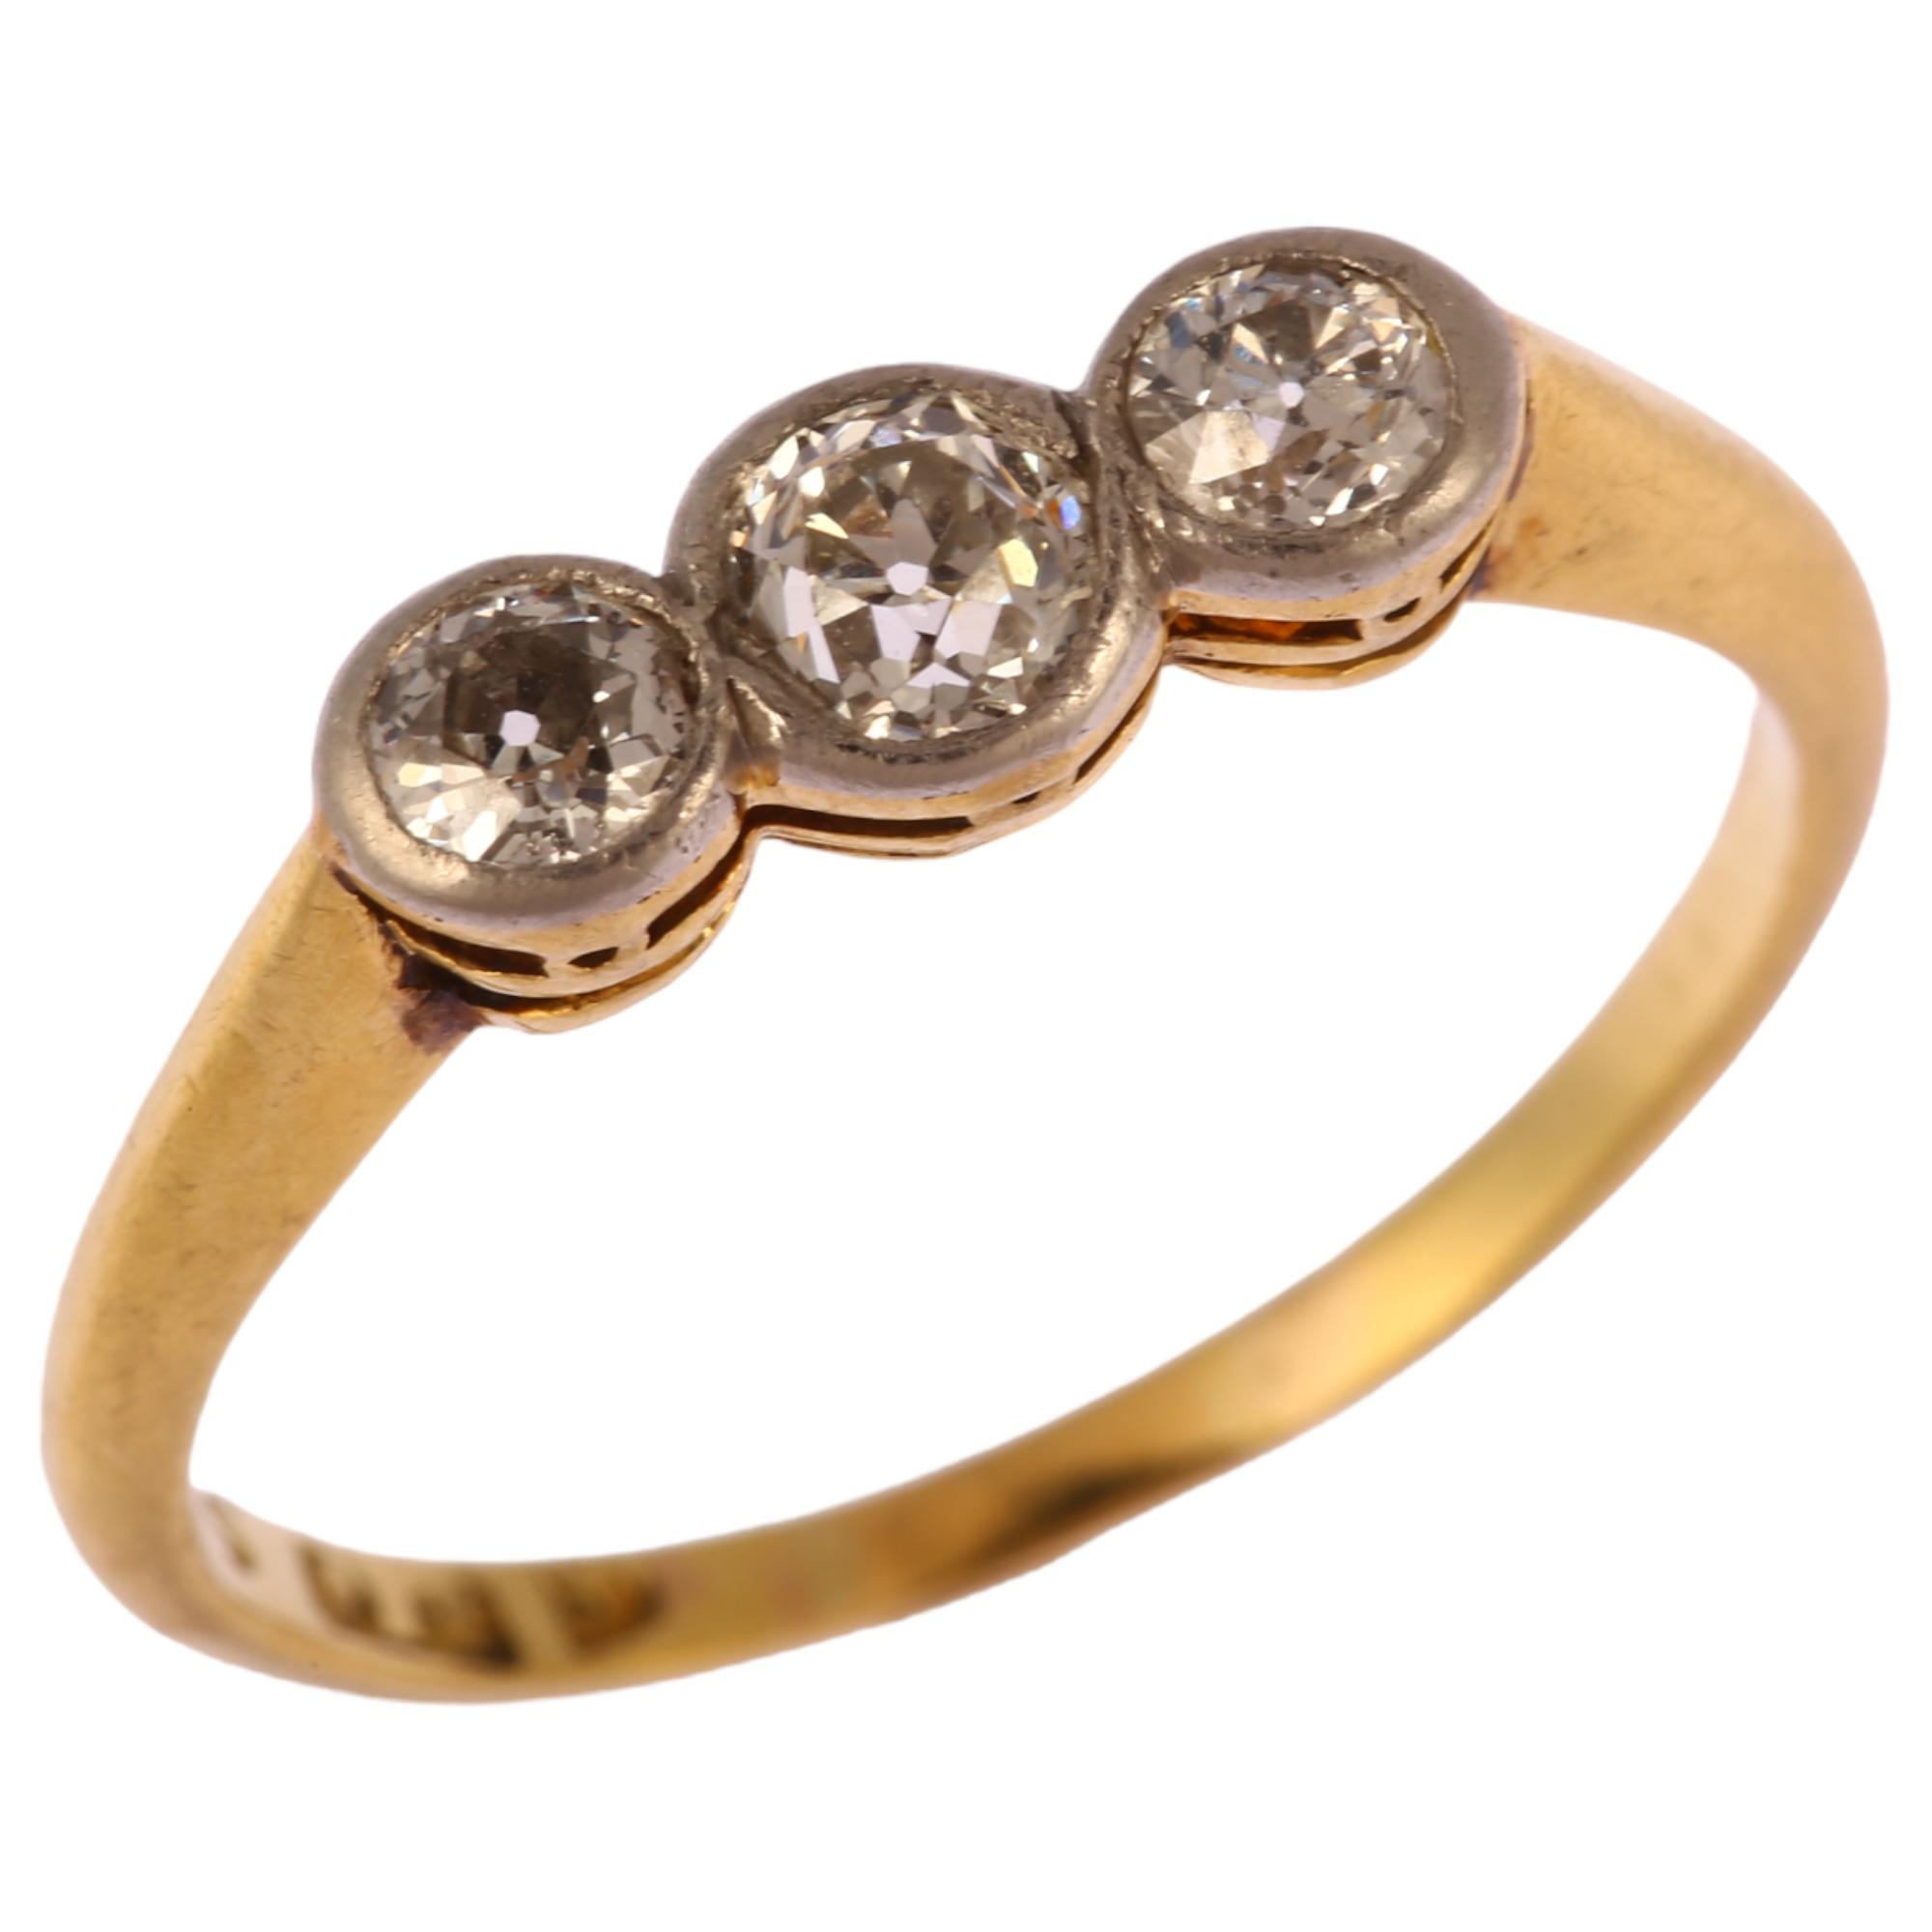 An early 20th century 18ct gold three stone diamond ring, bezel set with old European cut - Image 2 of 4